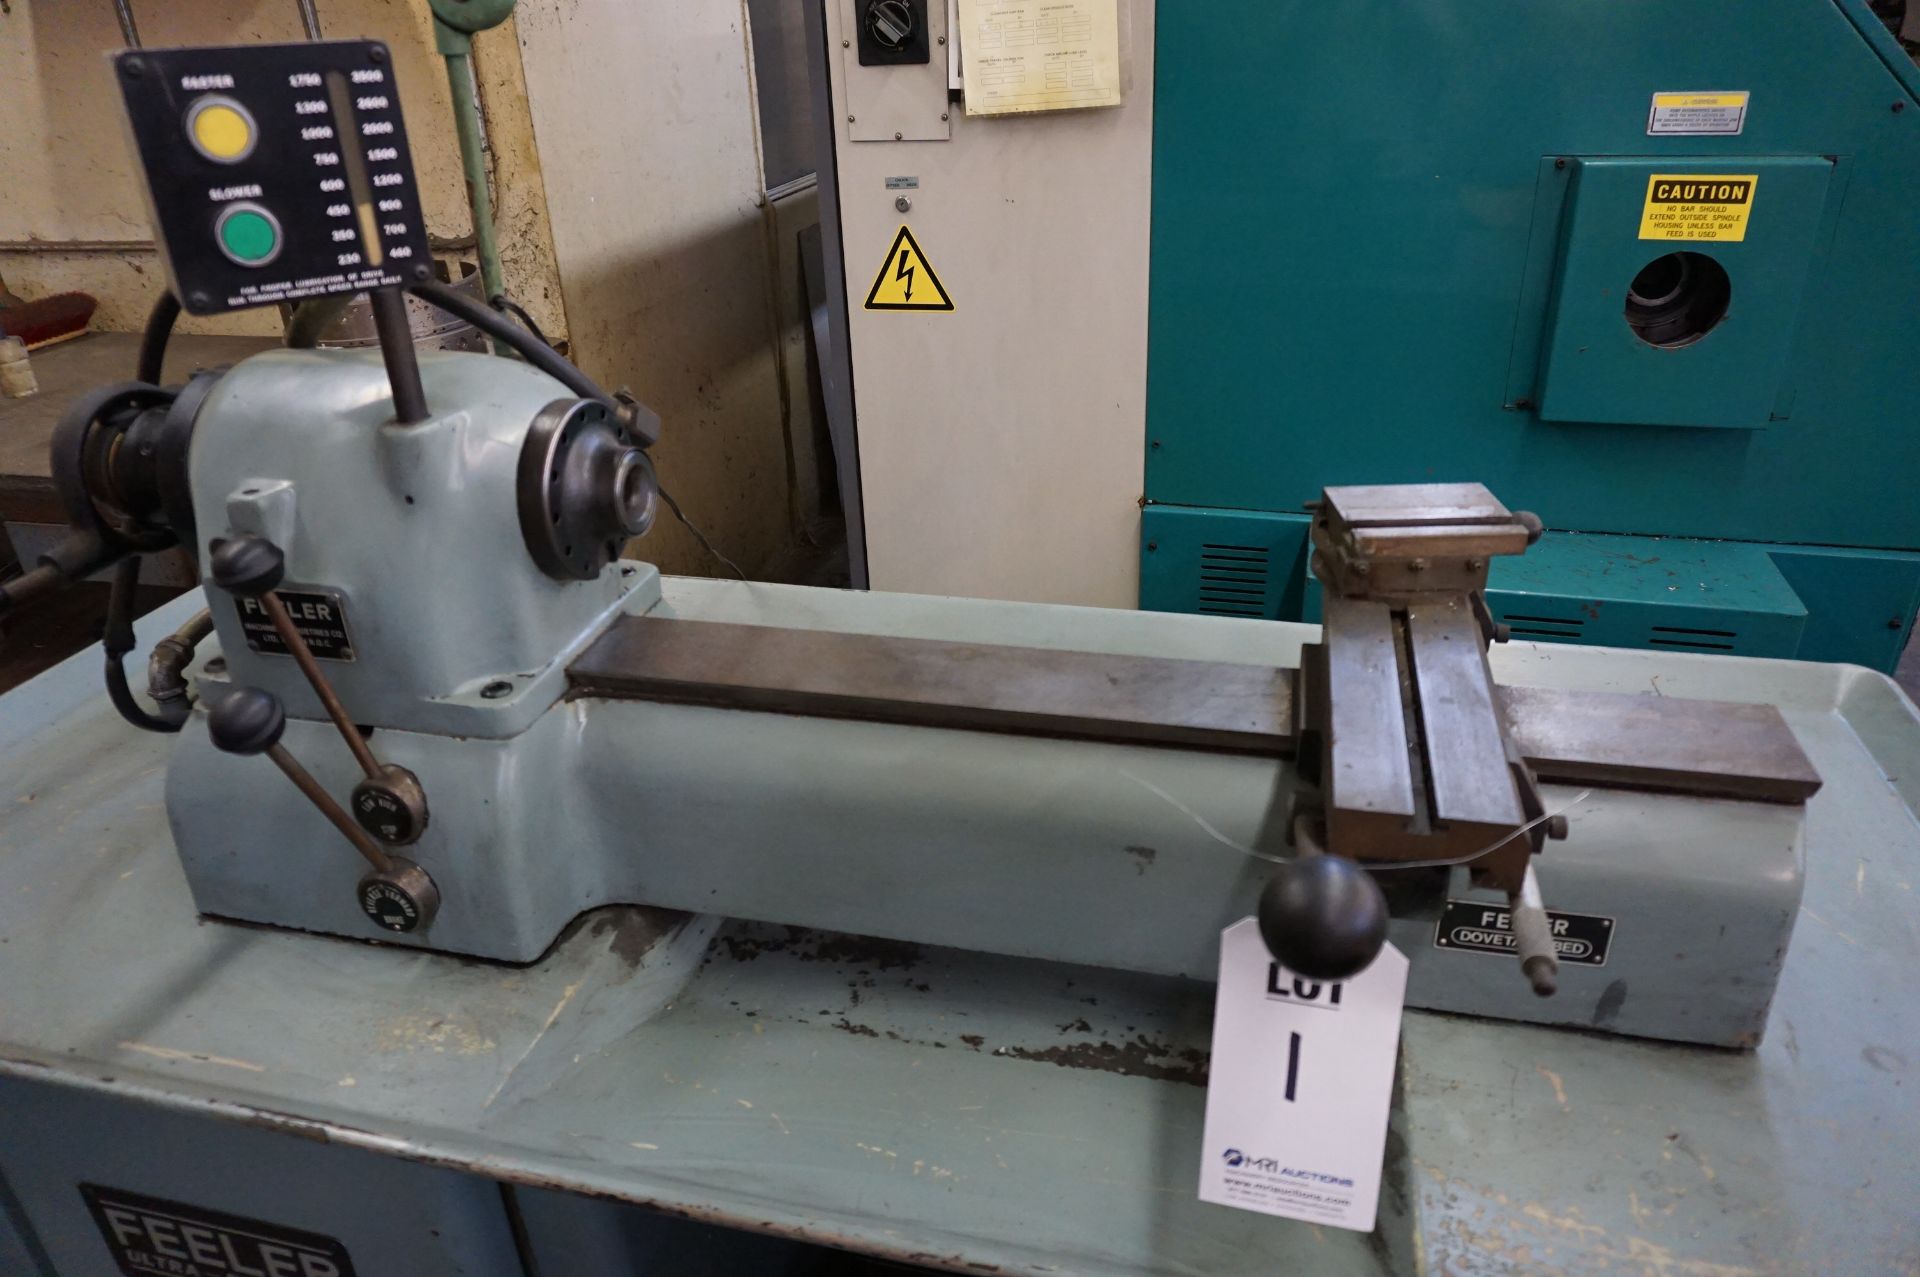 1980 FEELER FSM-59 PRECISION LATHE, S/N 690937, SWING OVER BED 9”, BED LENGTH 36” - Image 2 of 6